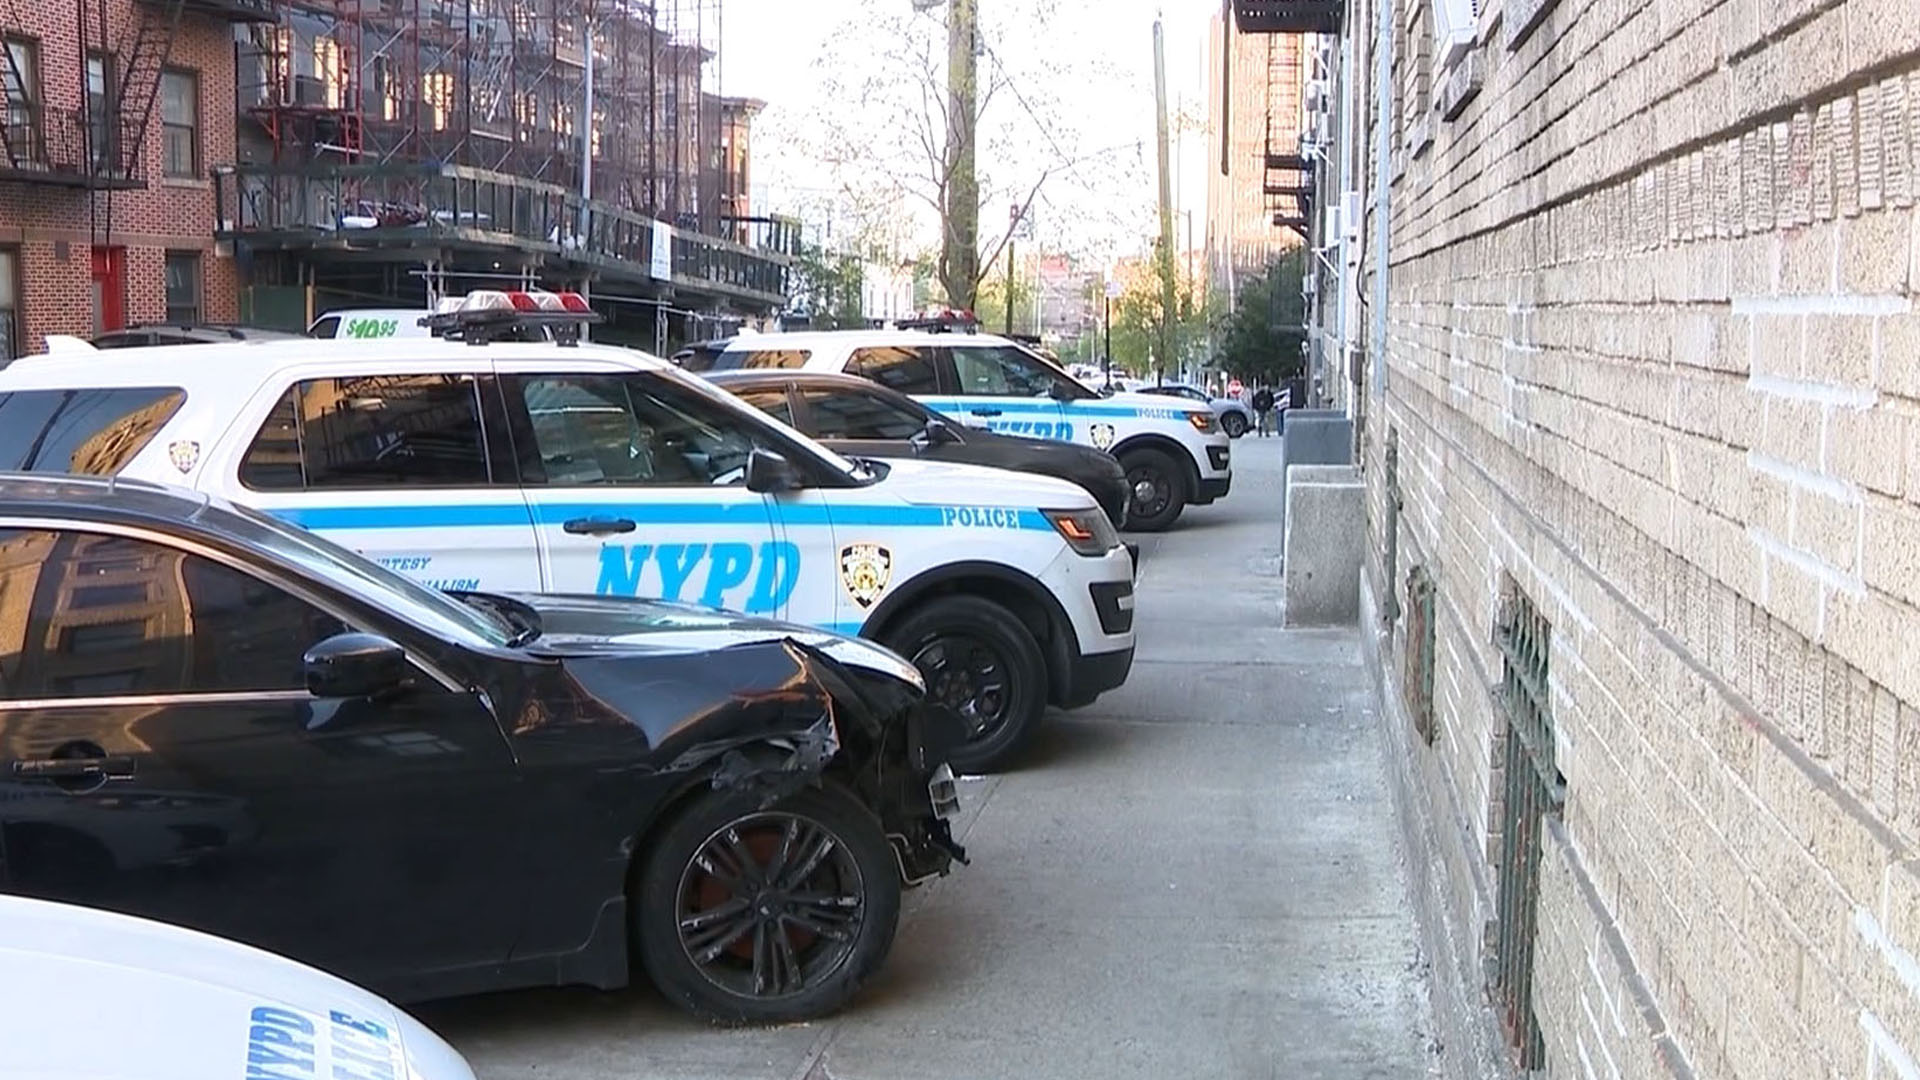 NYPD in hot water over common parking practice for their patrol cars – New Yorkers have had enough [Video]